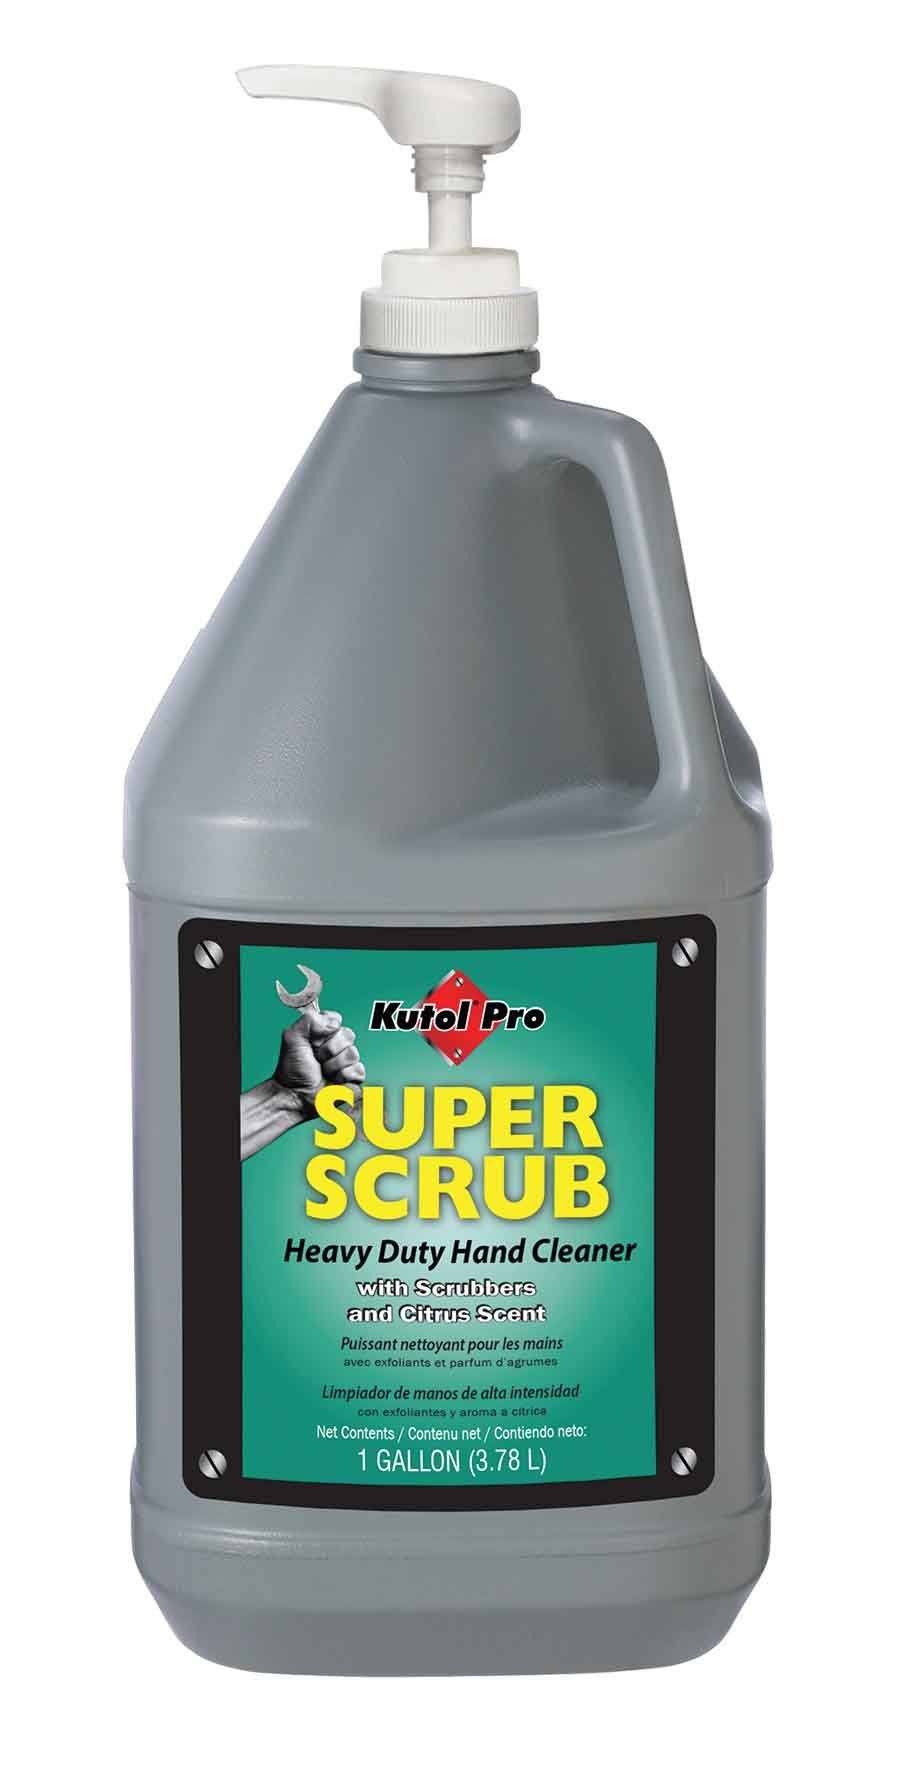 Super Scrub with Scrubbers Heavy Duty Hand Cleaner, One Gallon Bottle with Pump, Kutol Pro 4502, Pack of 4